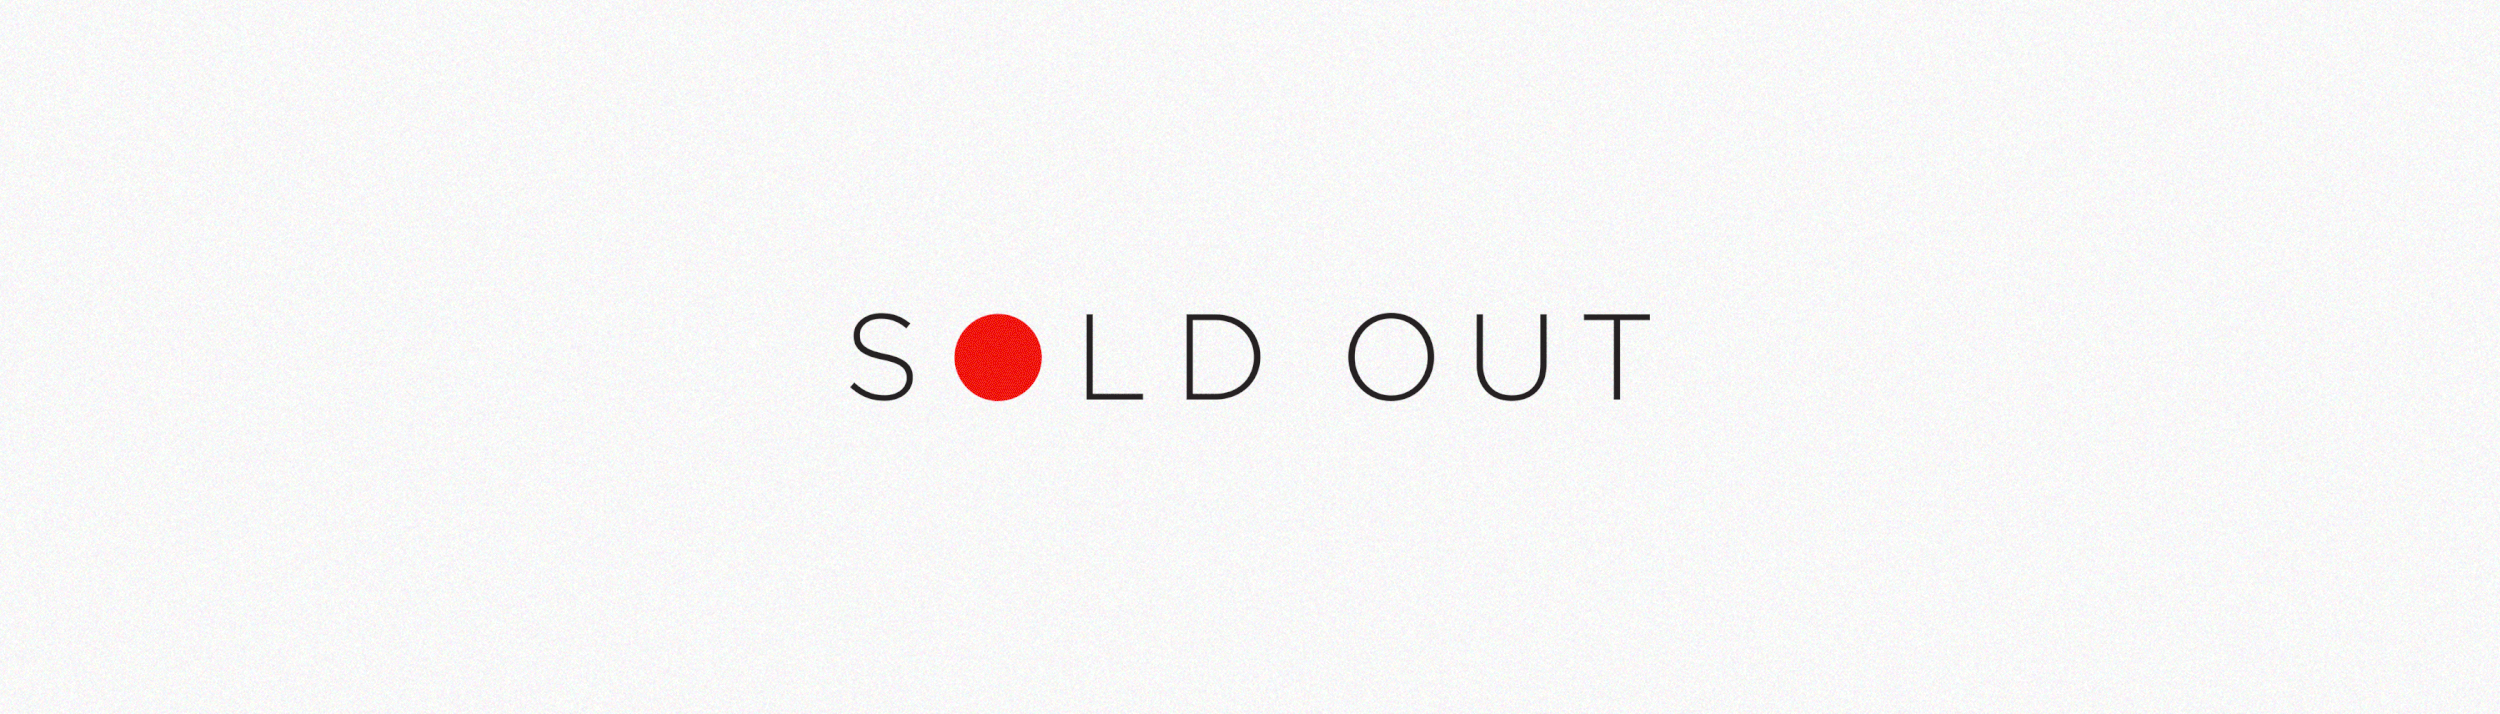 SoldOut_Logo_Animation3